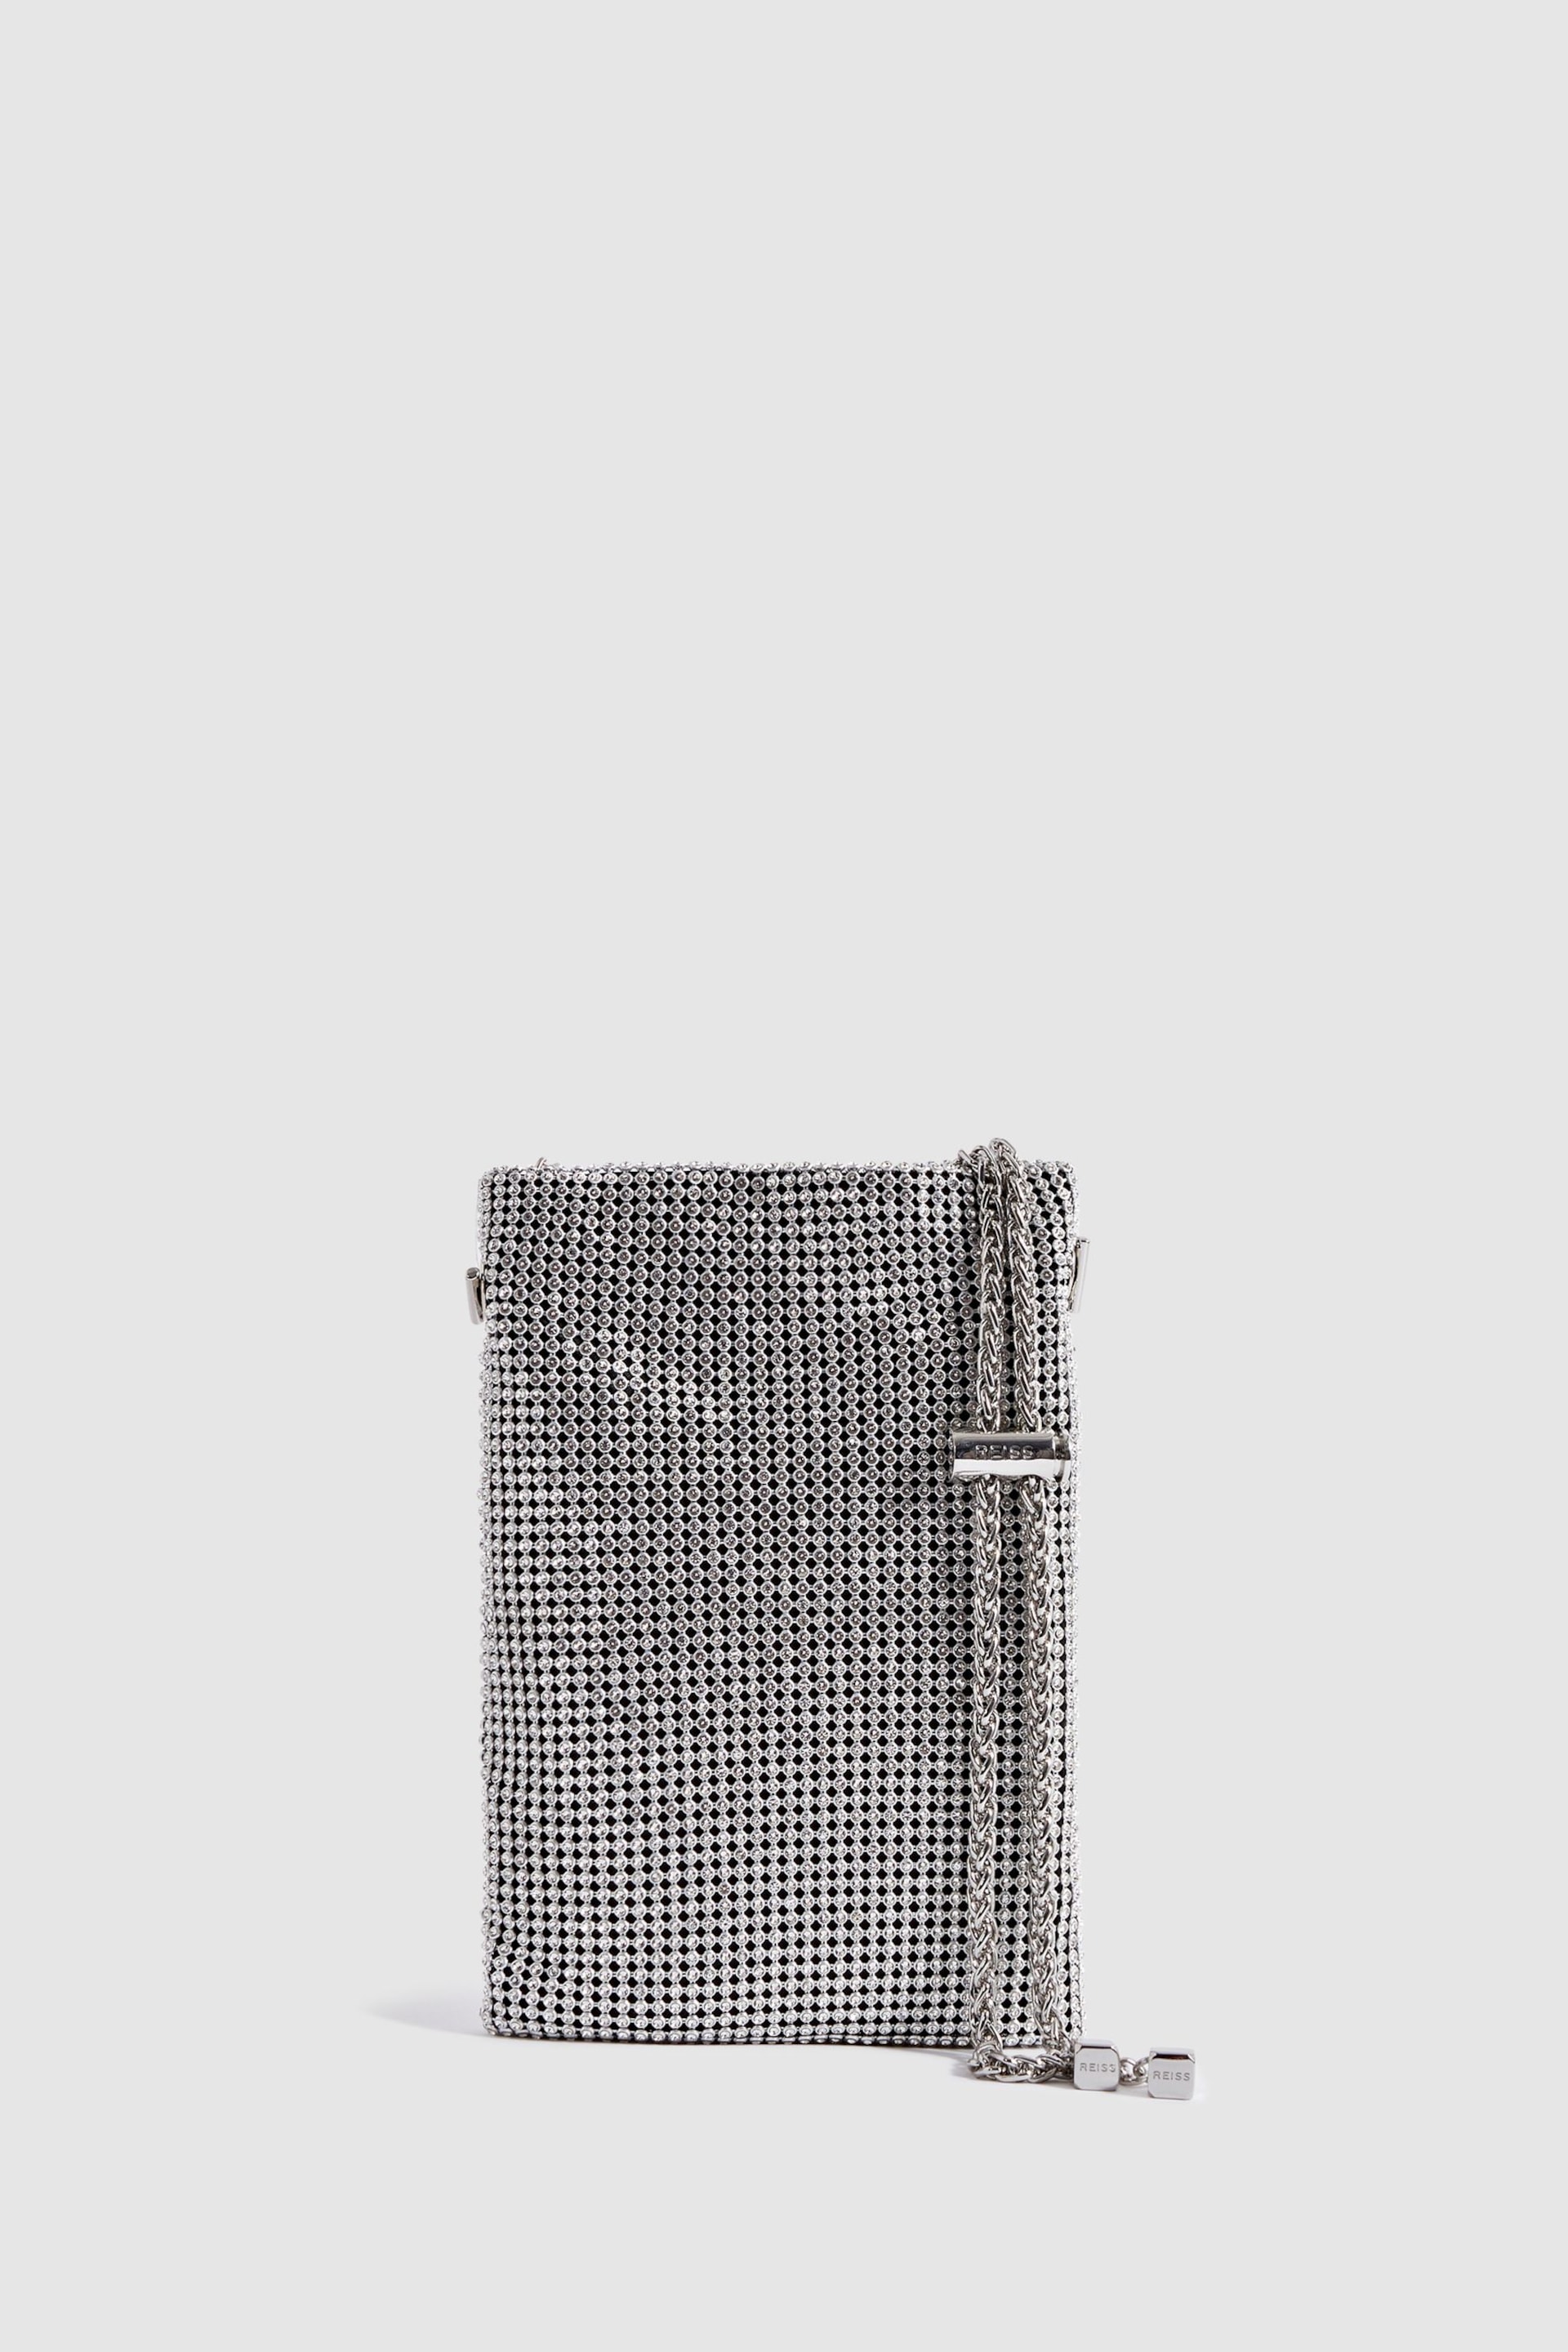 Reiss Silver Zuri Embellished Adjustable Strap Phone Pouch - Image 1 of 8